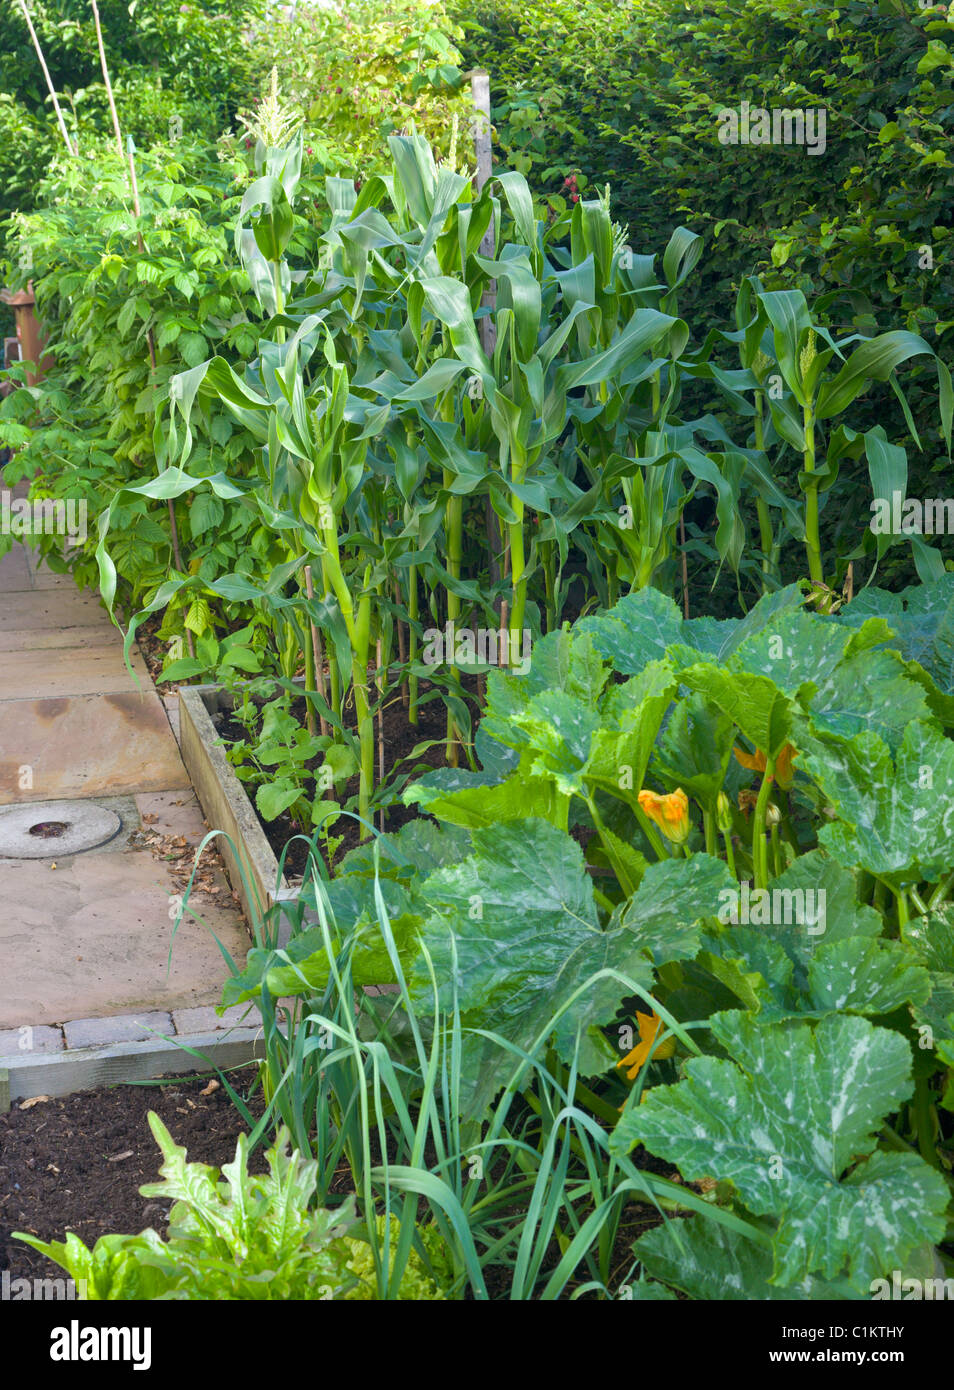 Vegetable patch in summer Stock Photo